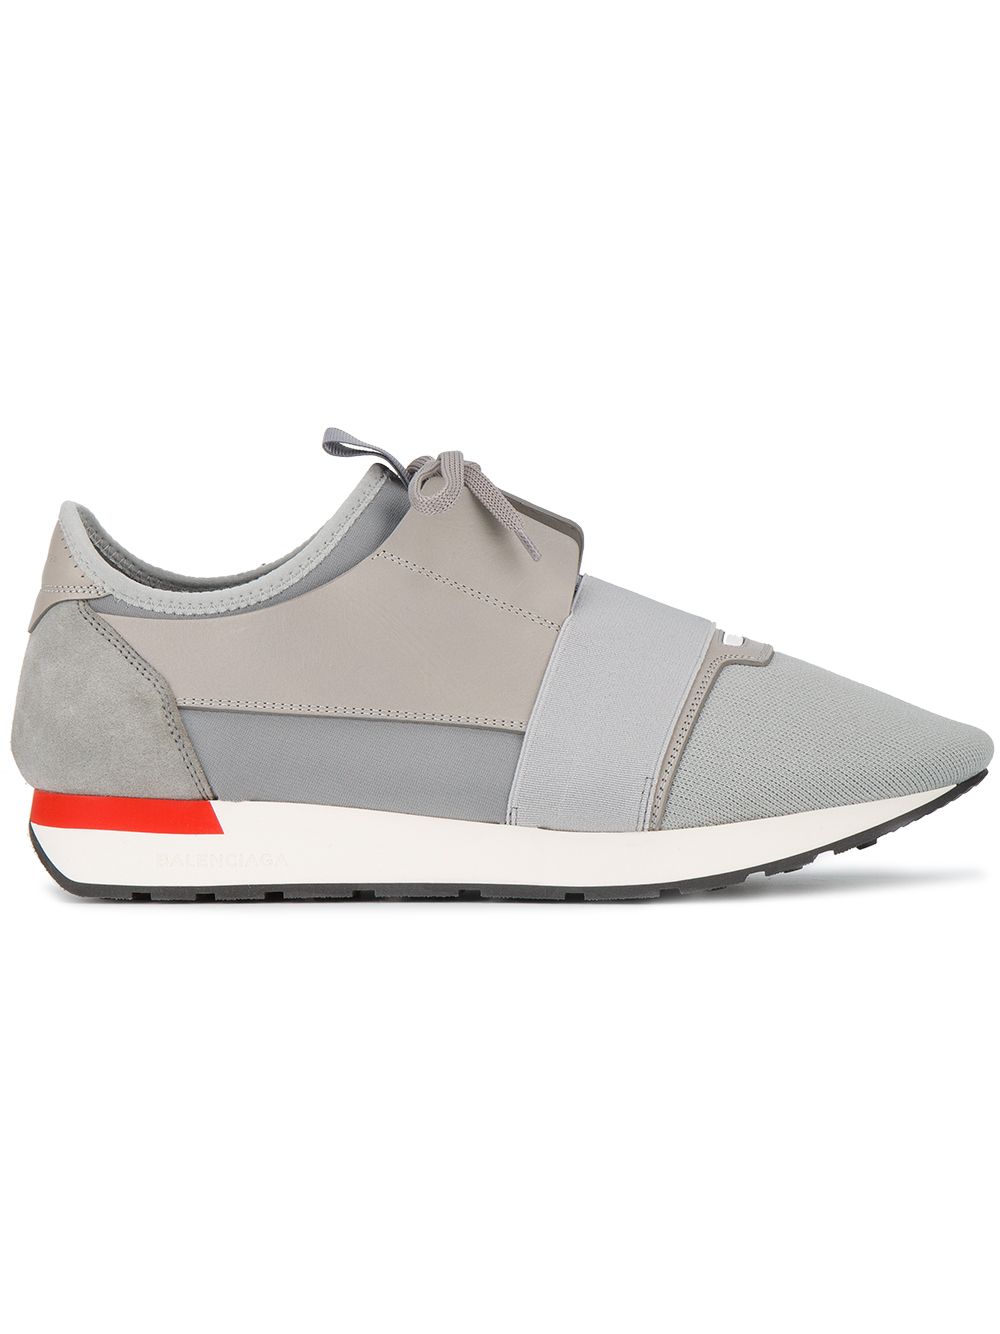 balenciaga race runner leather suede and neoprene sneakers